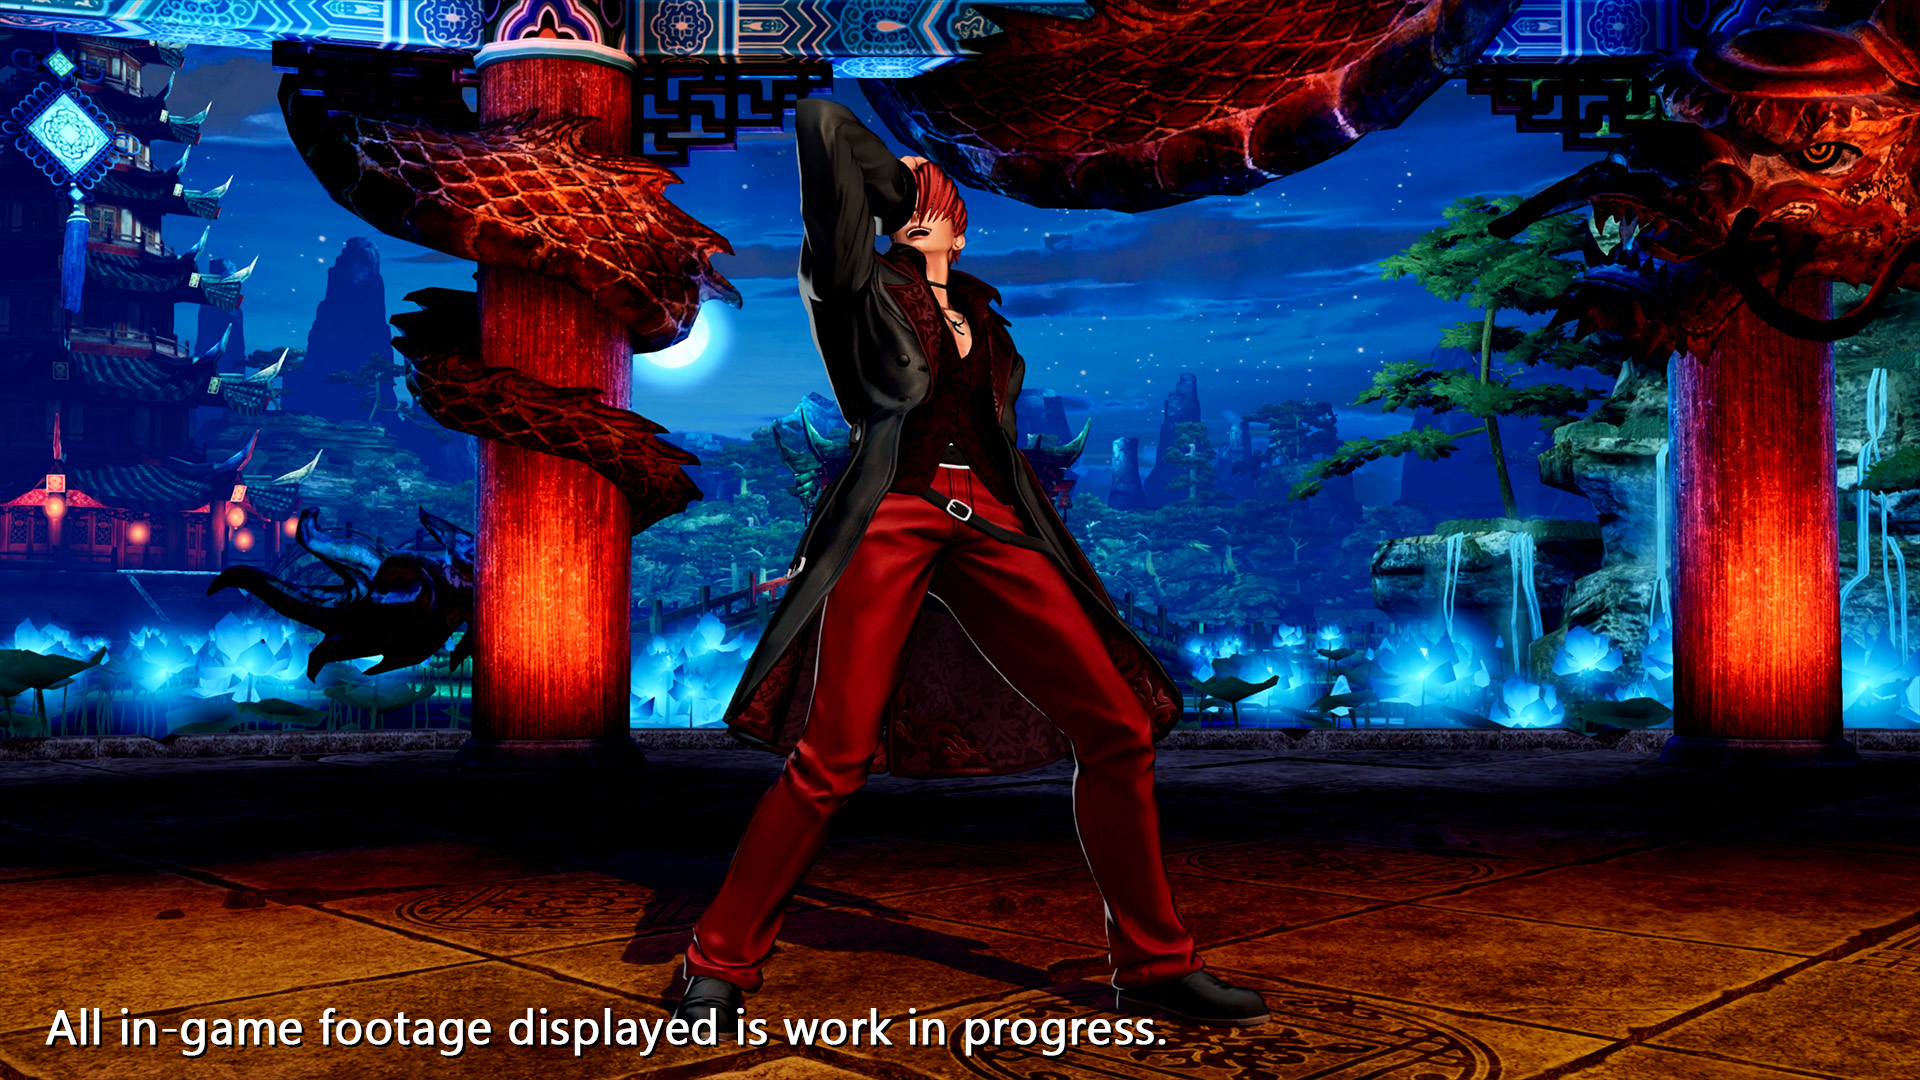 The King of Fighters XV review (in progress) - EGM